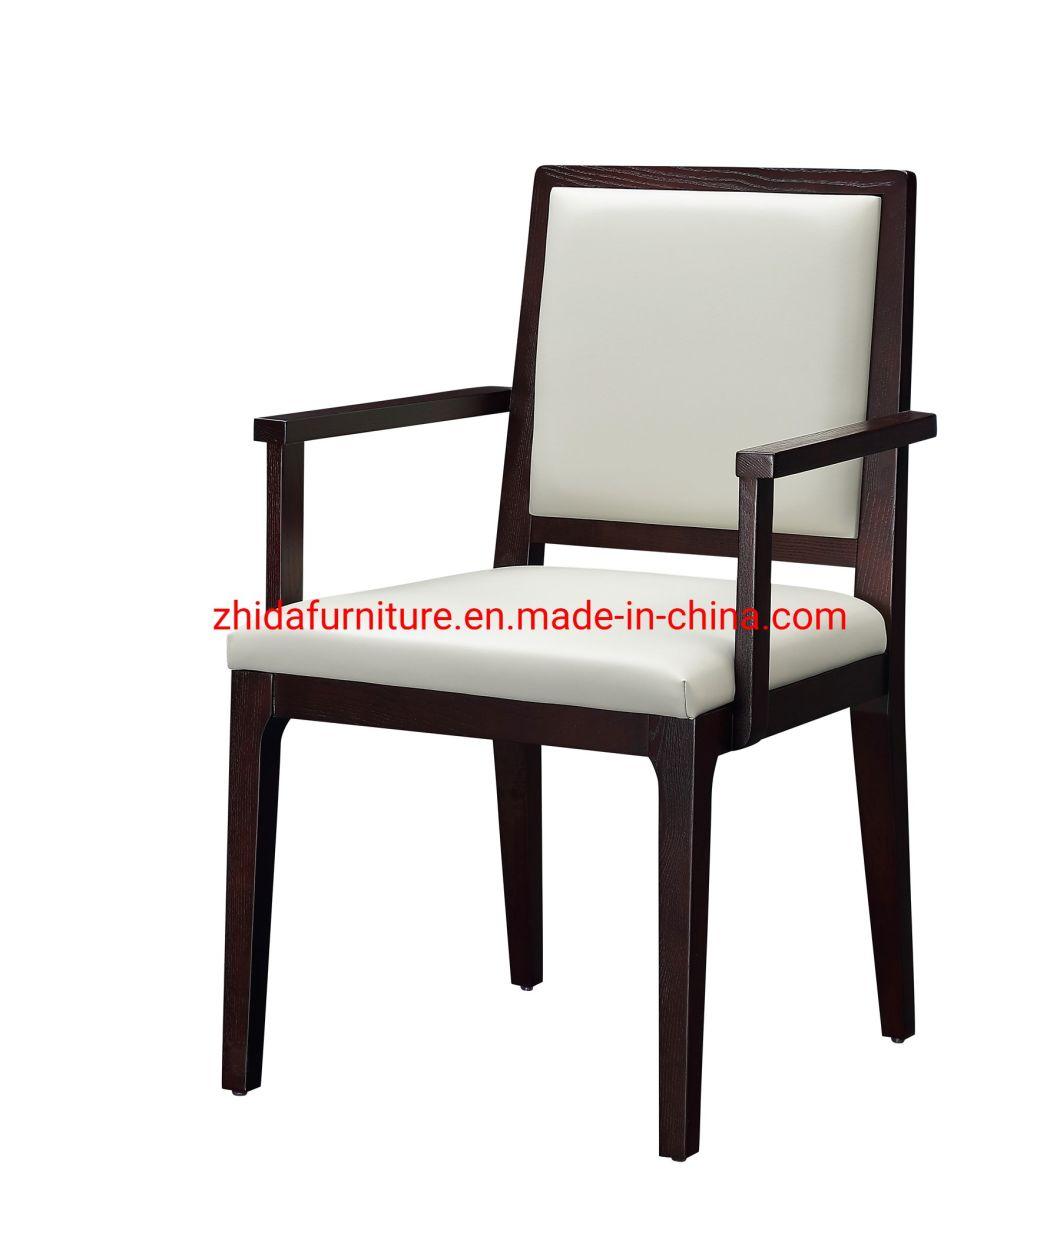 Modern Fabric Single Commercial Furniture Restaurant Dining Chair for Hotel